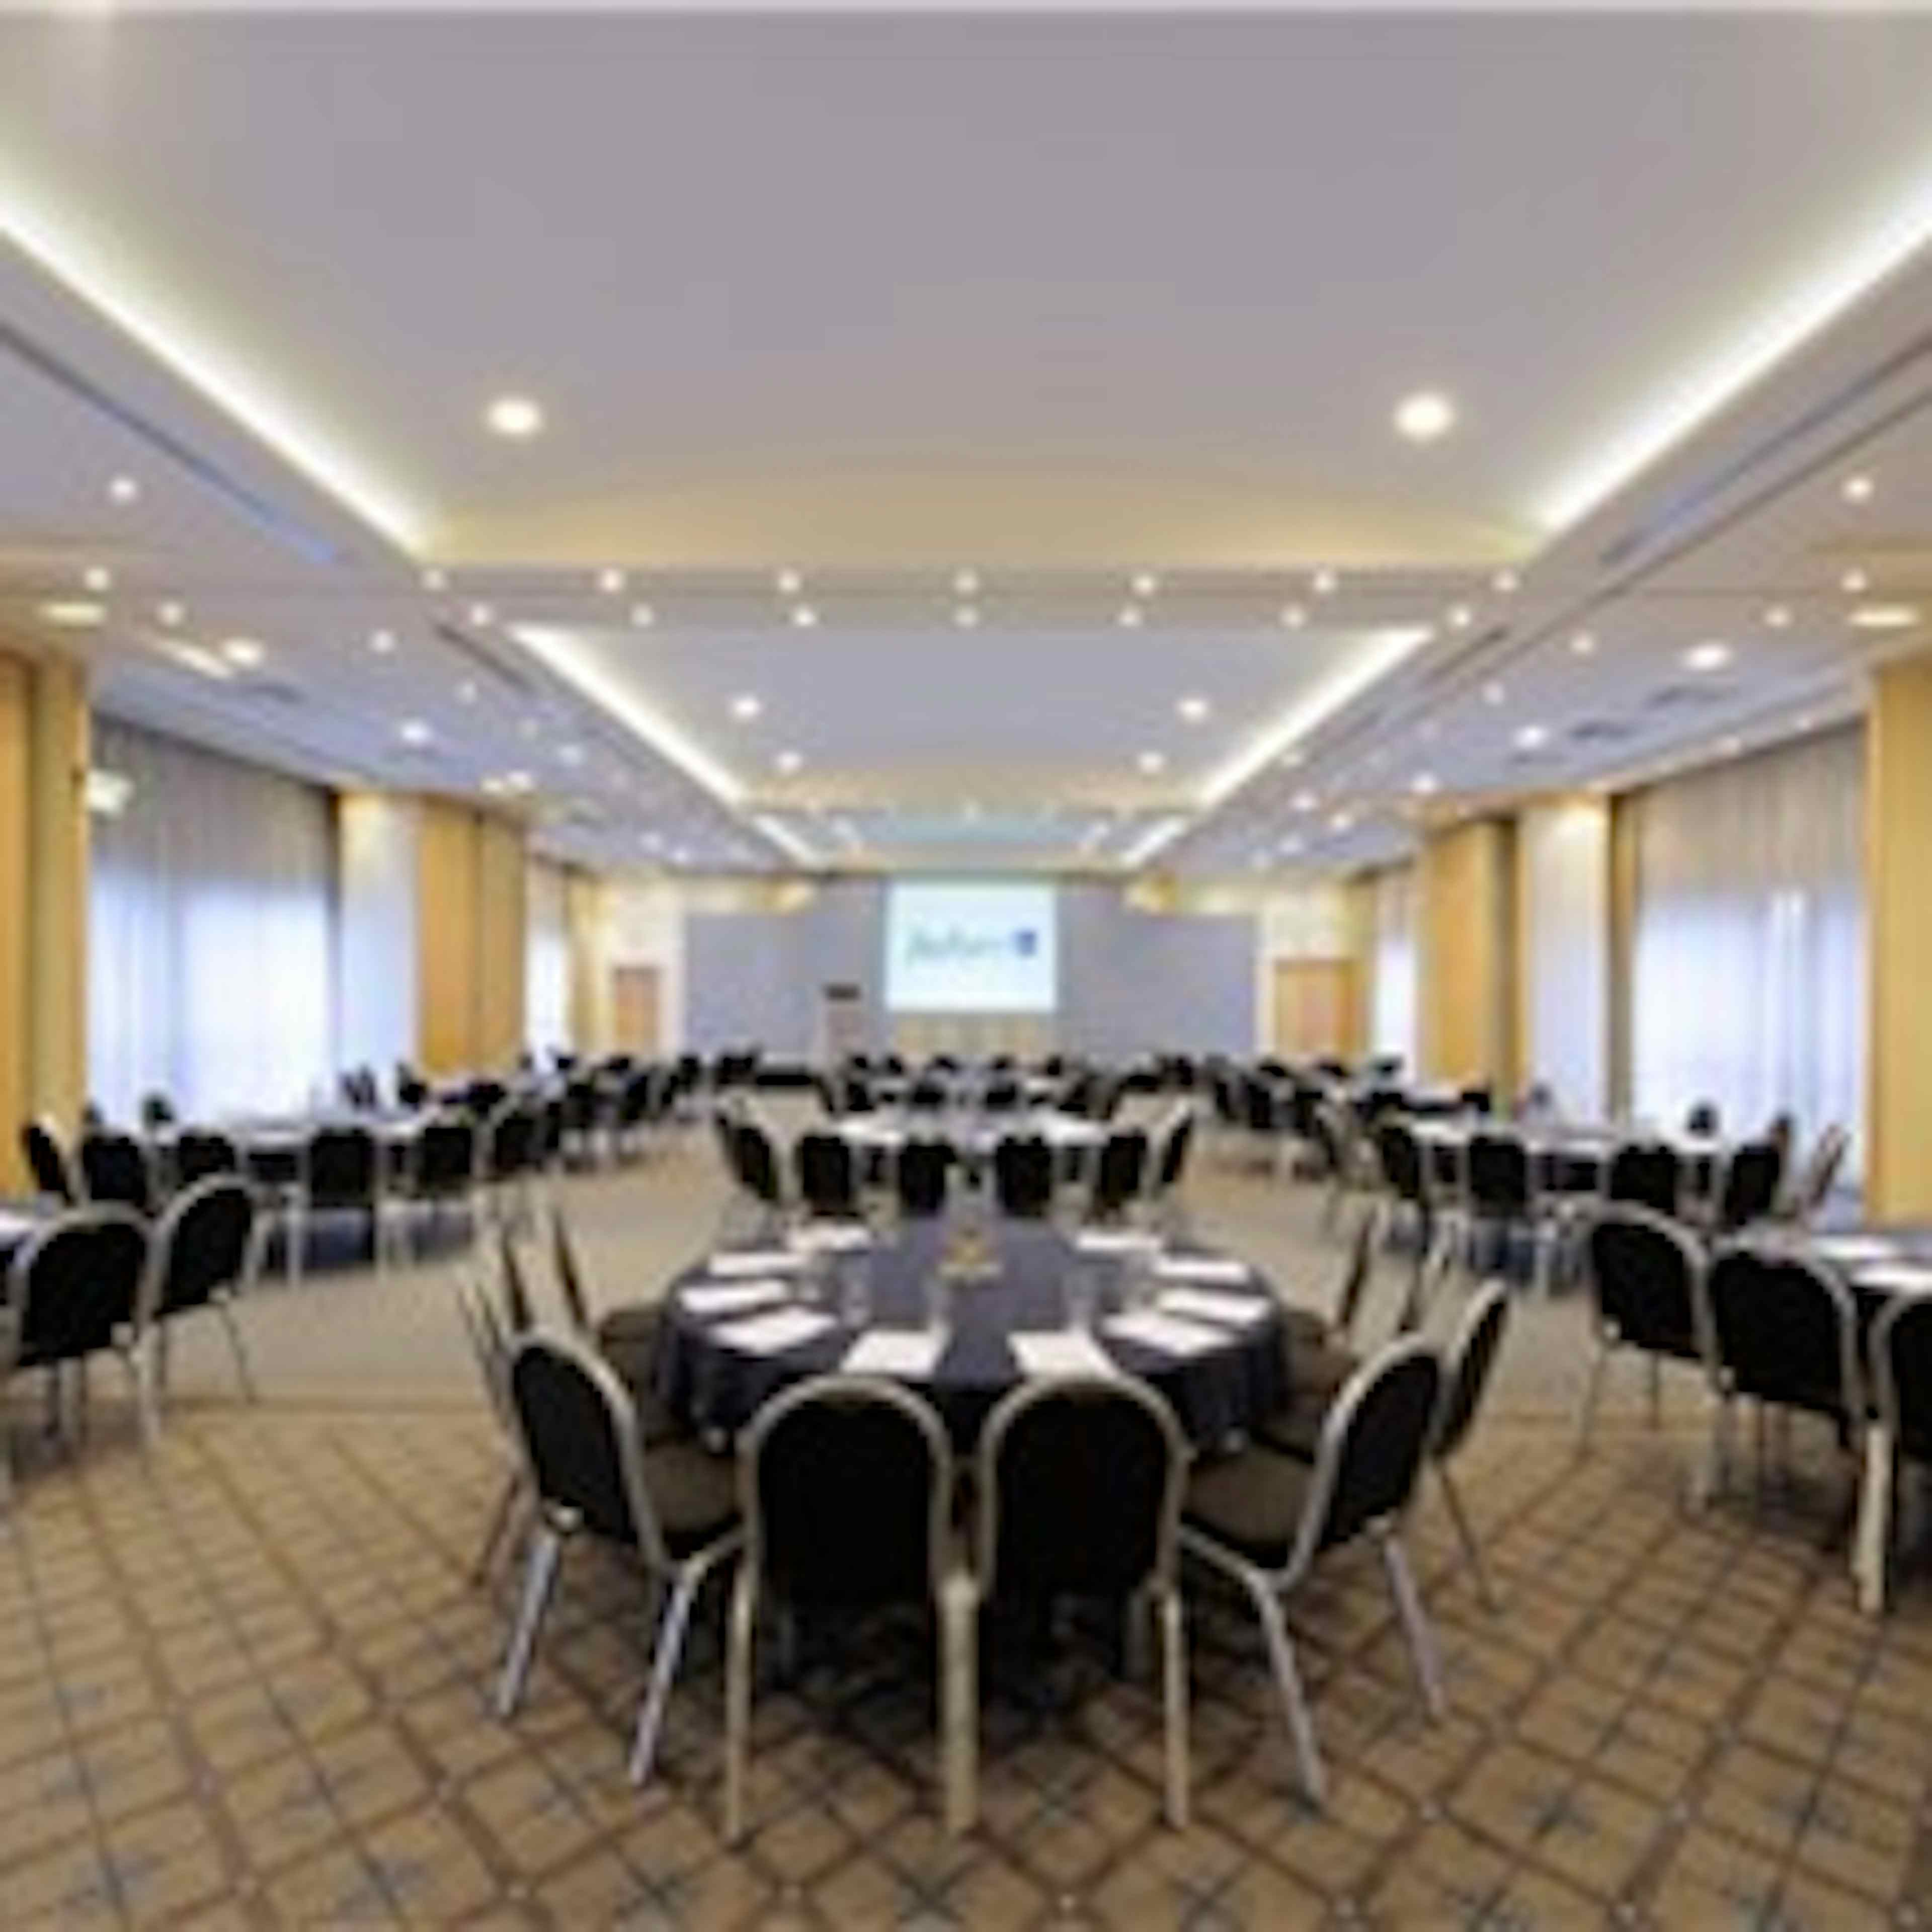 Radisson Blu Manchester Airport - Brussels Suite image 1